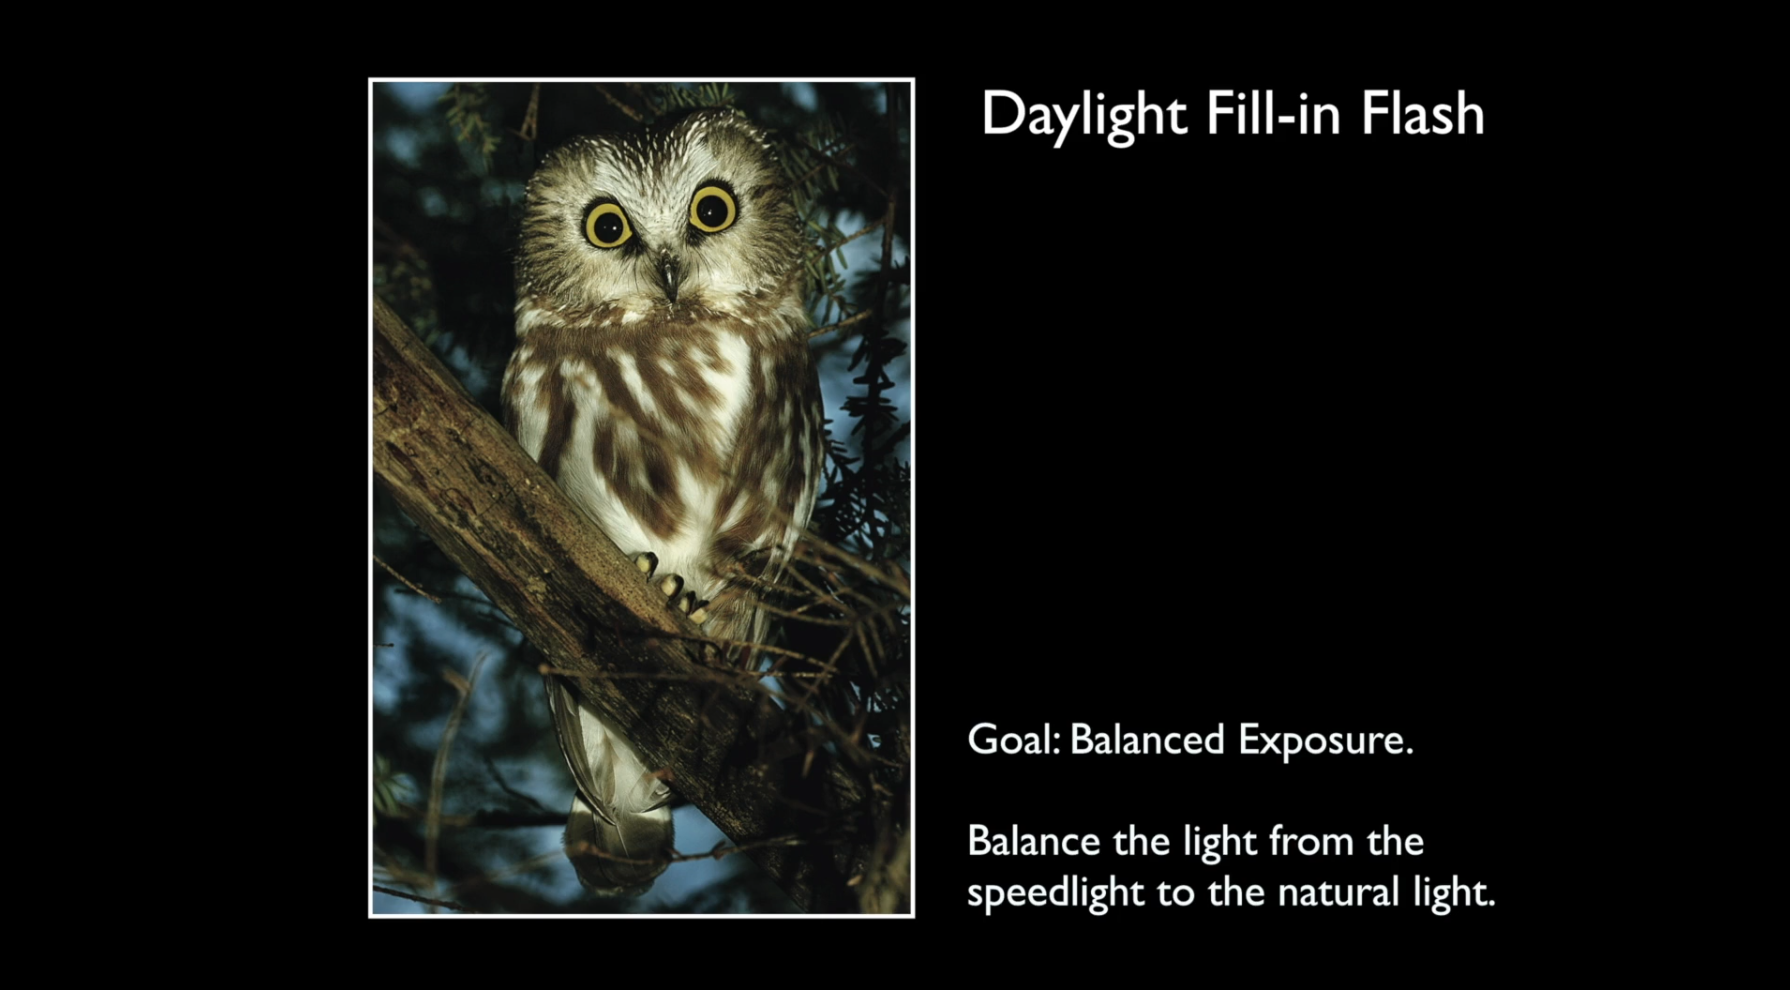 Rick Sammon shares how he uses fill flash to bring out the best image of this backyard owl.